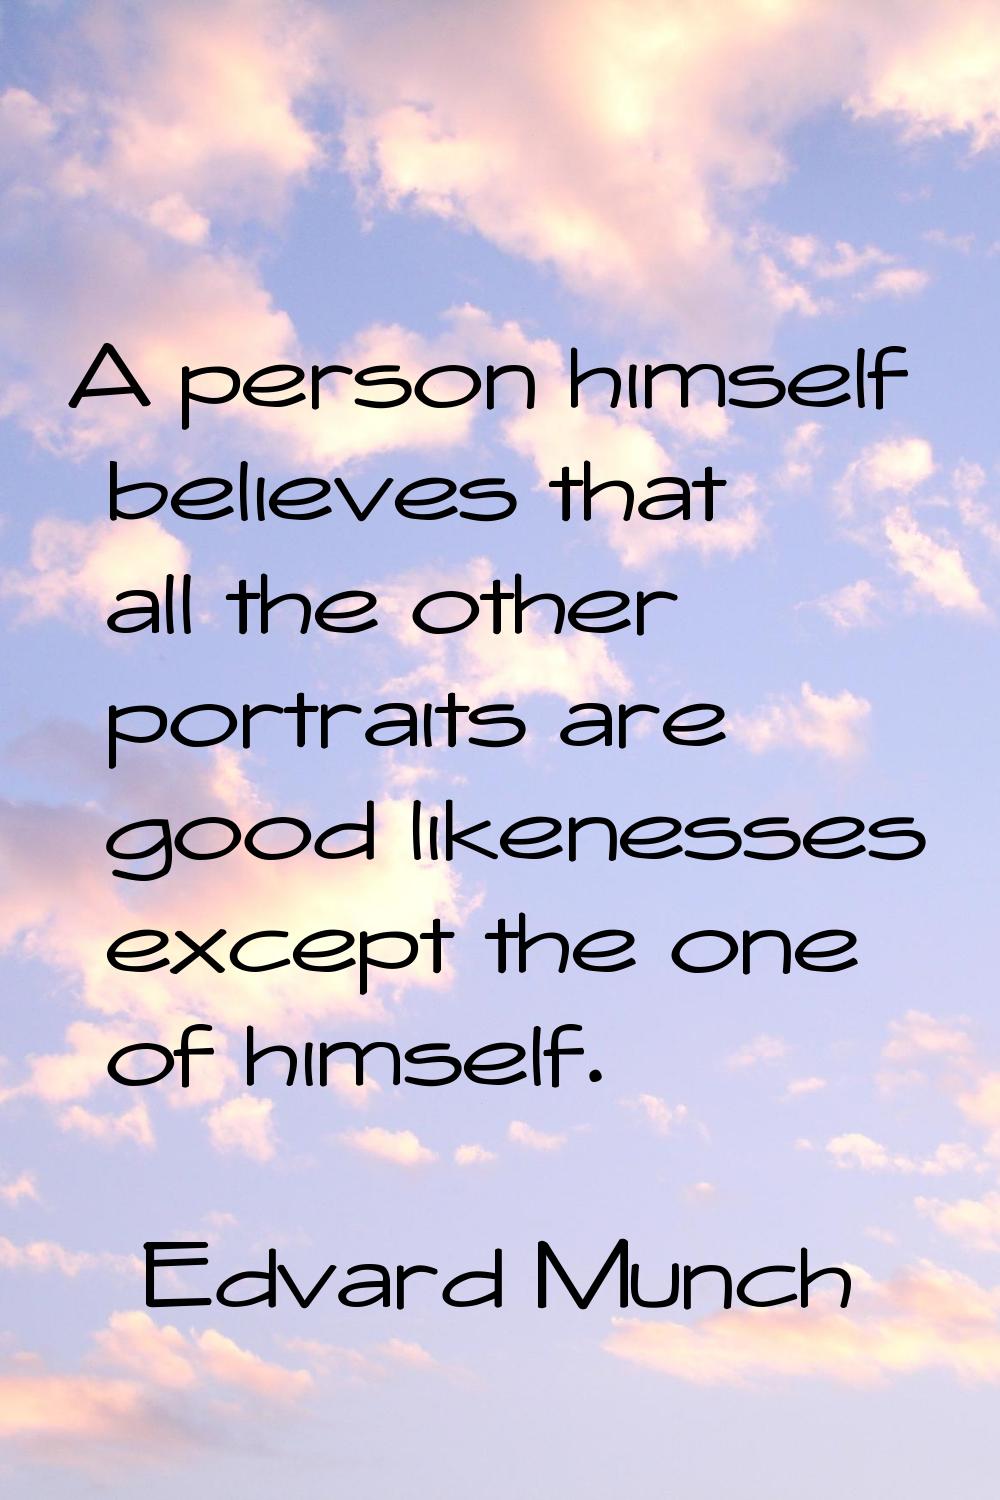 A person himself believes that all the other portraits are good likenesses except the one of himsel